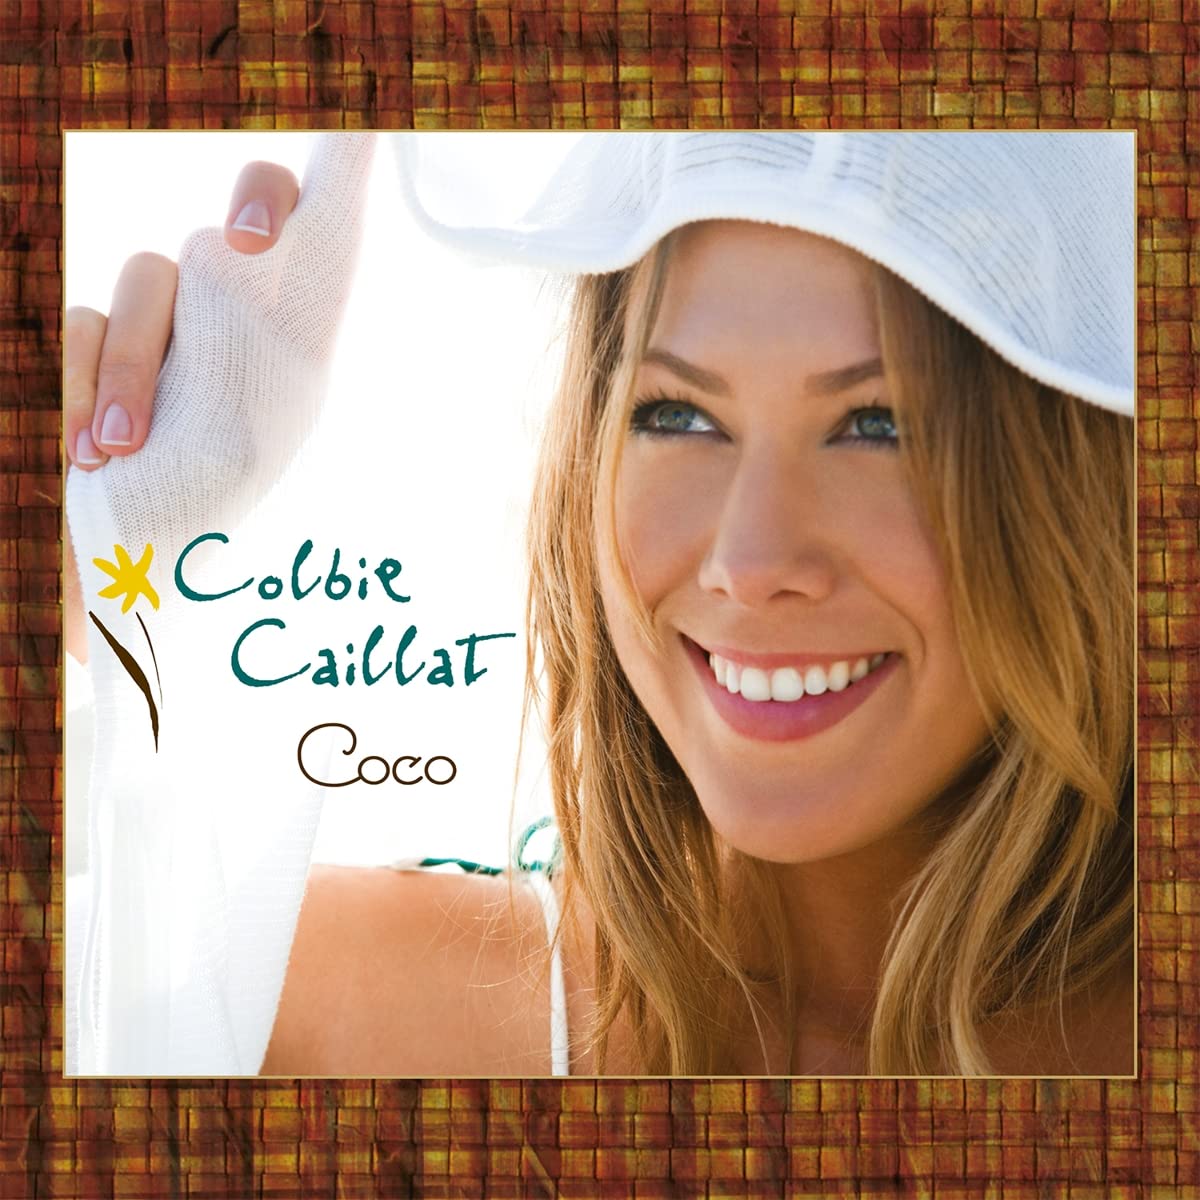 Colbie Caillat - Coco LP